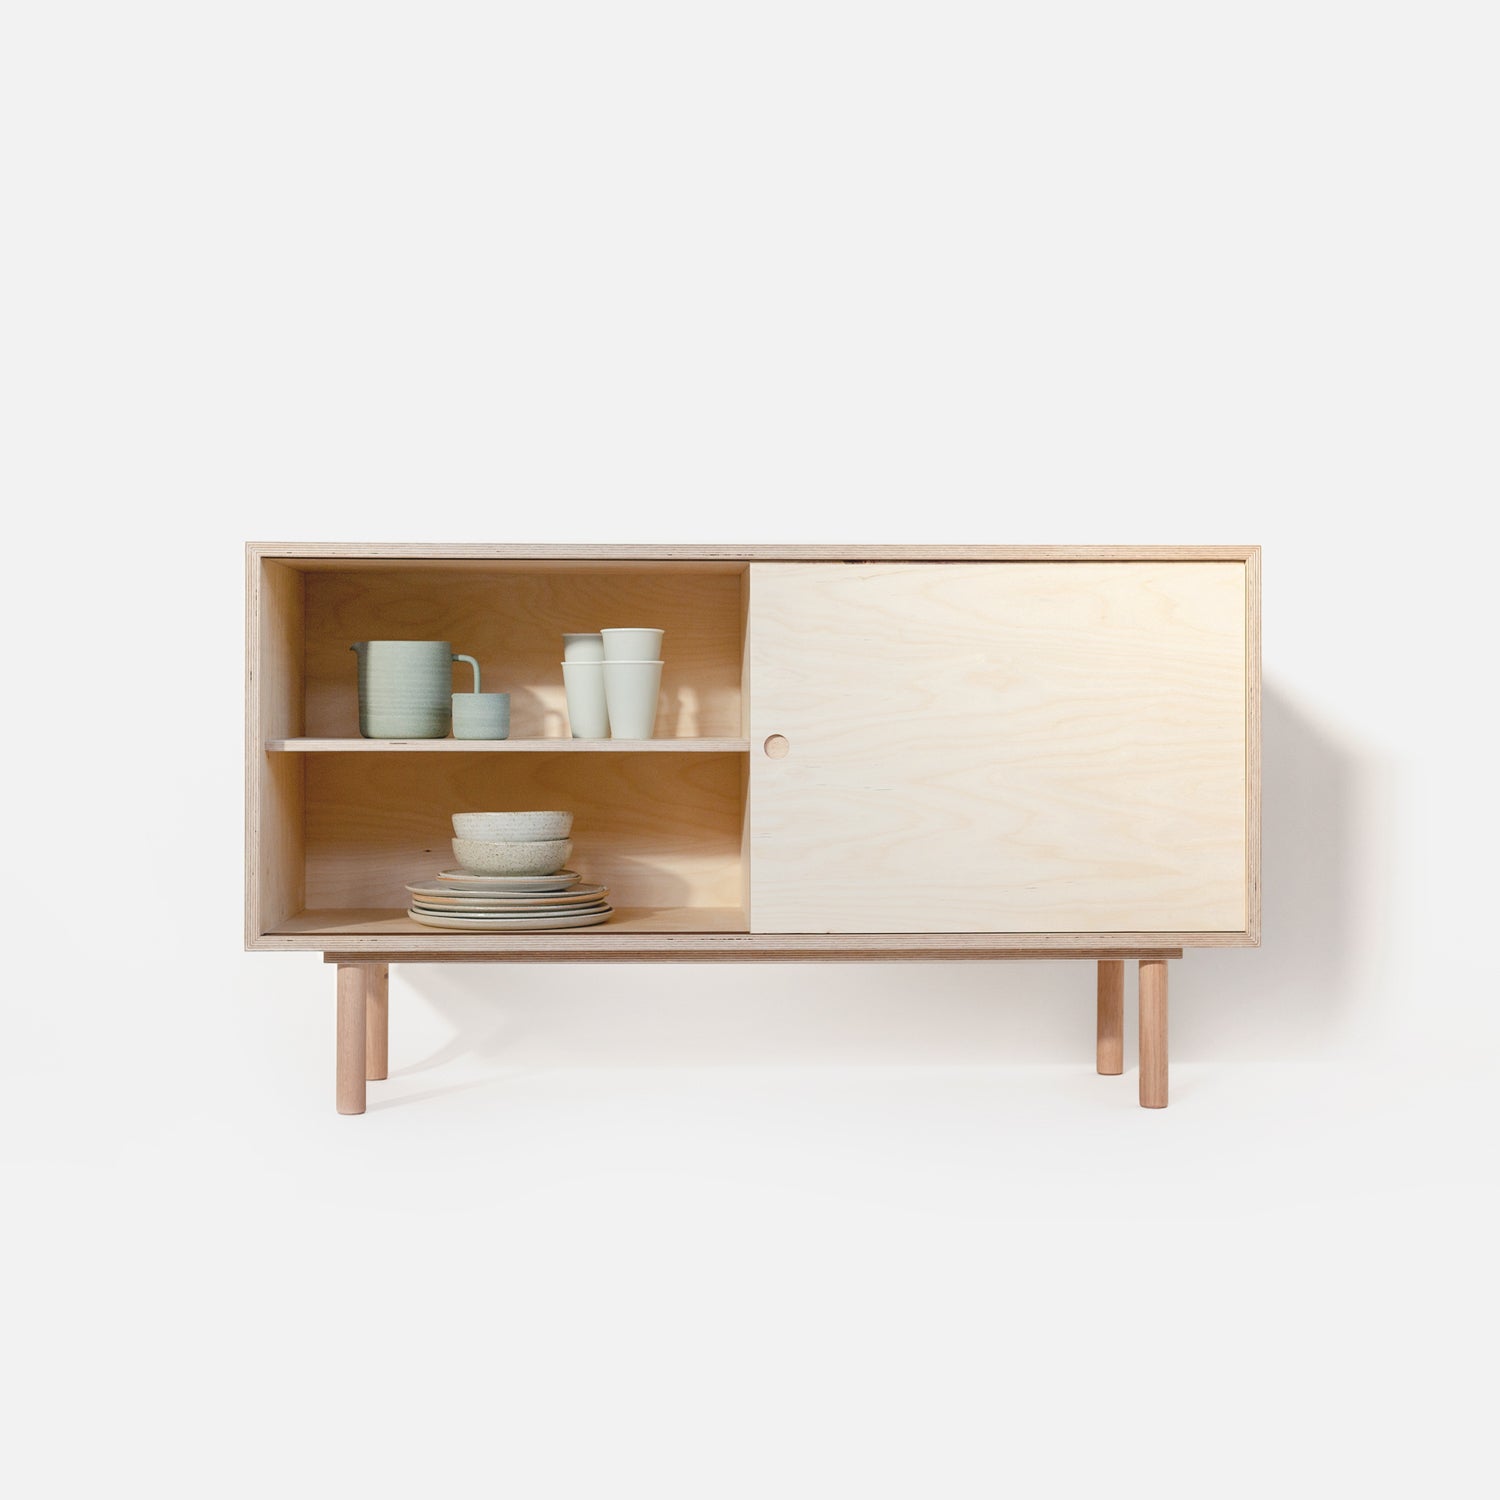 Modern Bedroom Storage and Minimalist furniture for a simple 2019